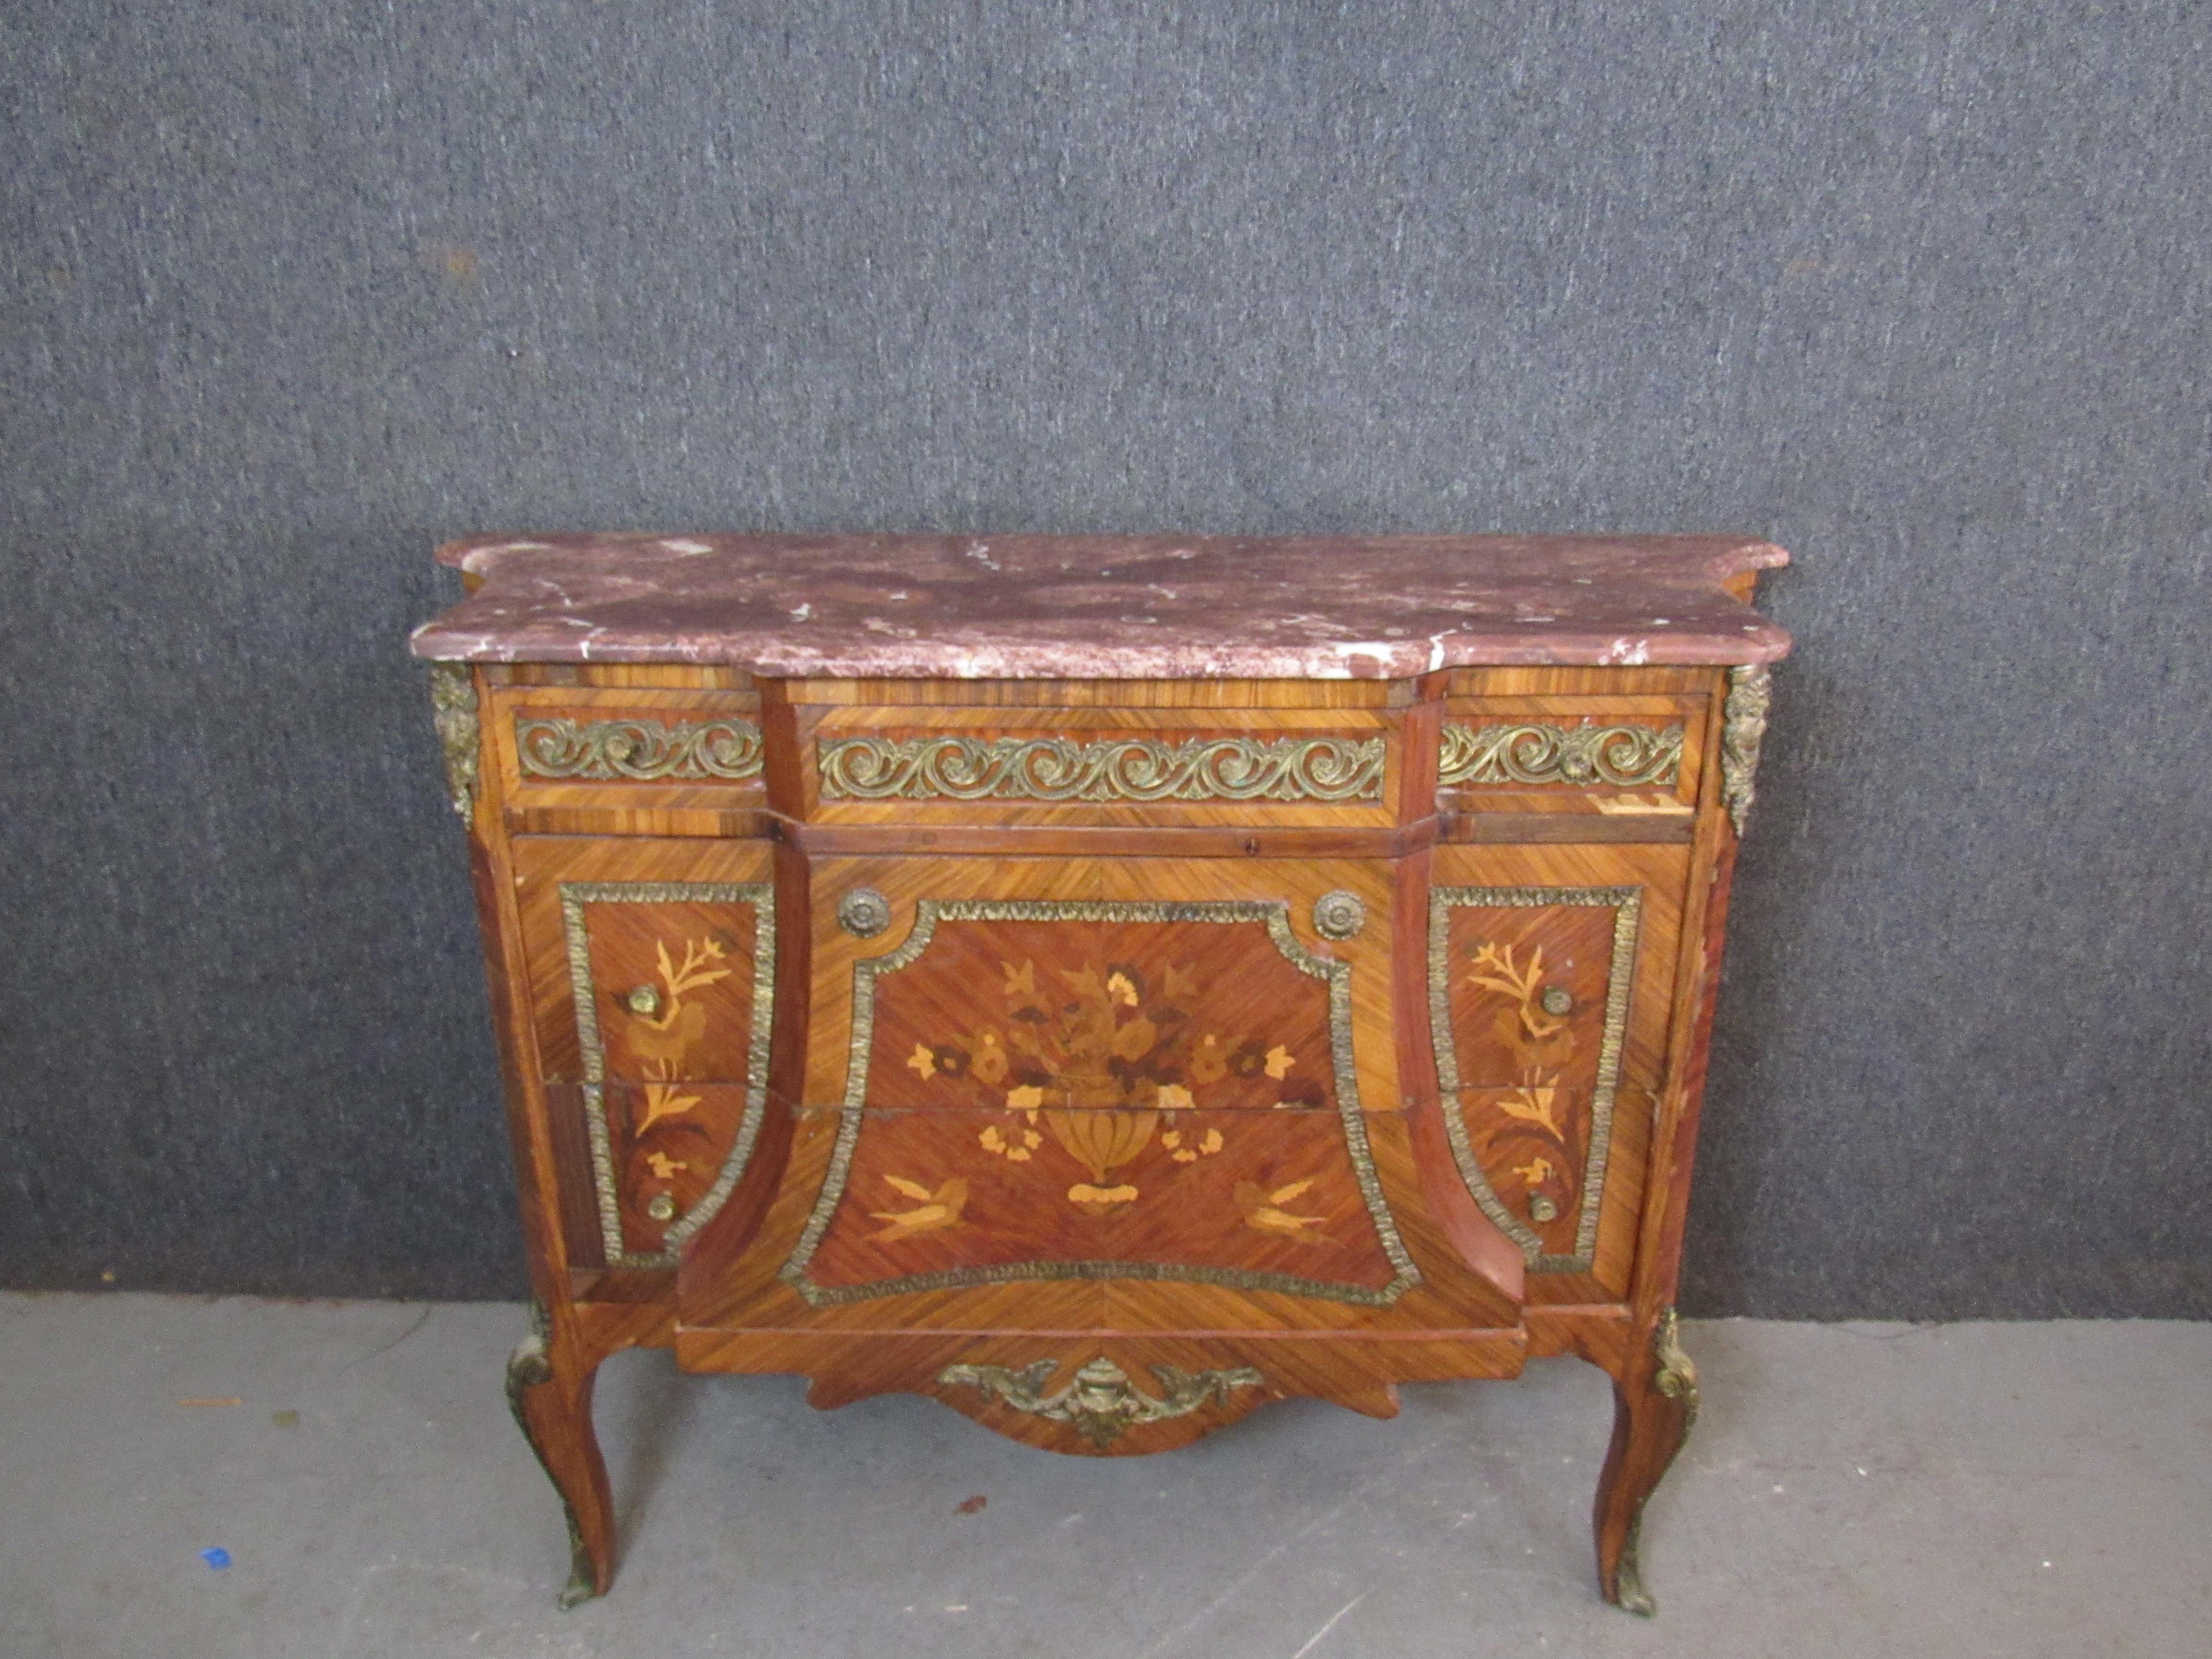 Relieve all the magic and splendor of King Louis XV's royal court with this exquisite antique commode. A striking zebrawood veneer accentuates the beautiful marquetry of birds and flowers. Cast metal adornments give a sense of timeless luxury. A